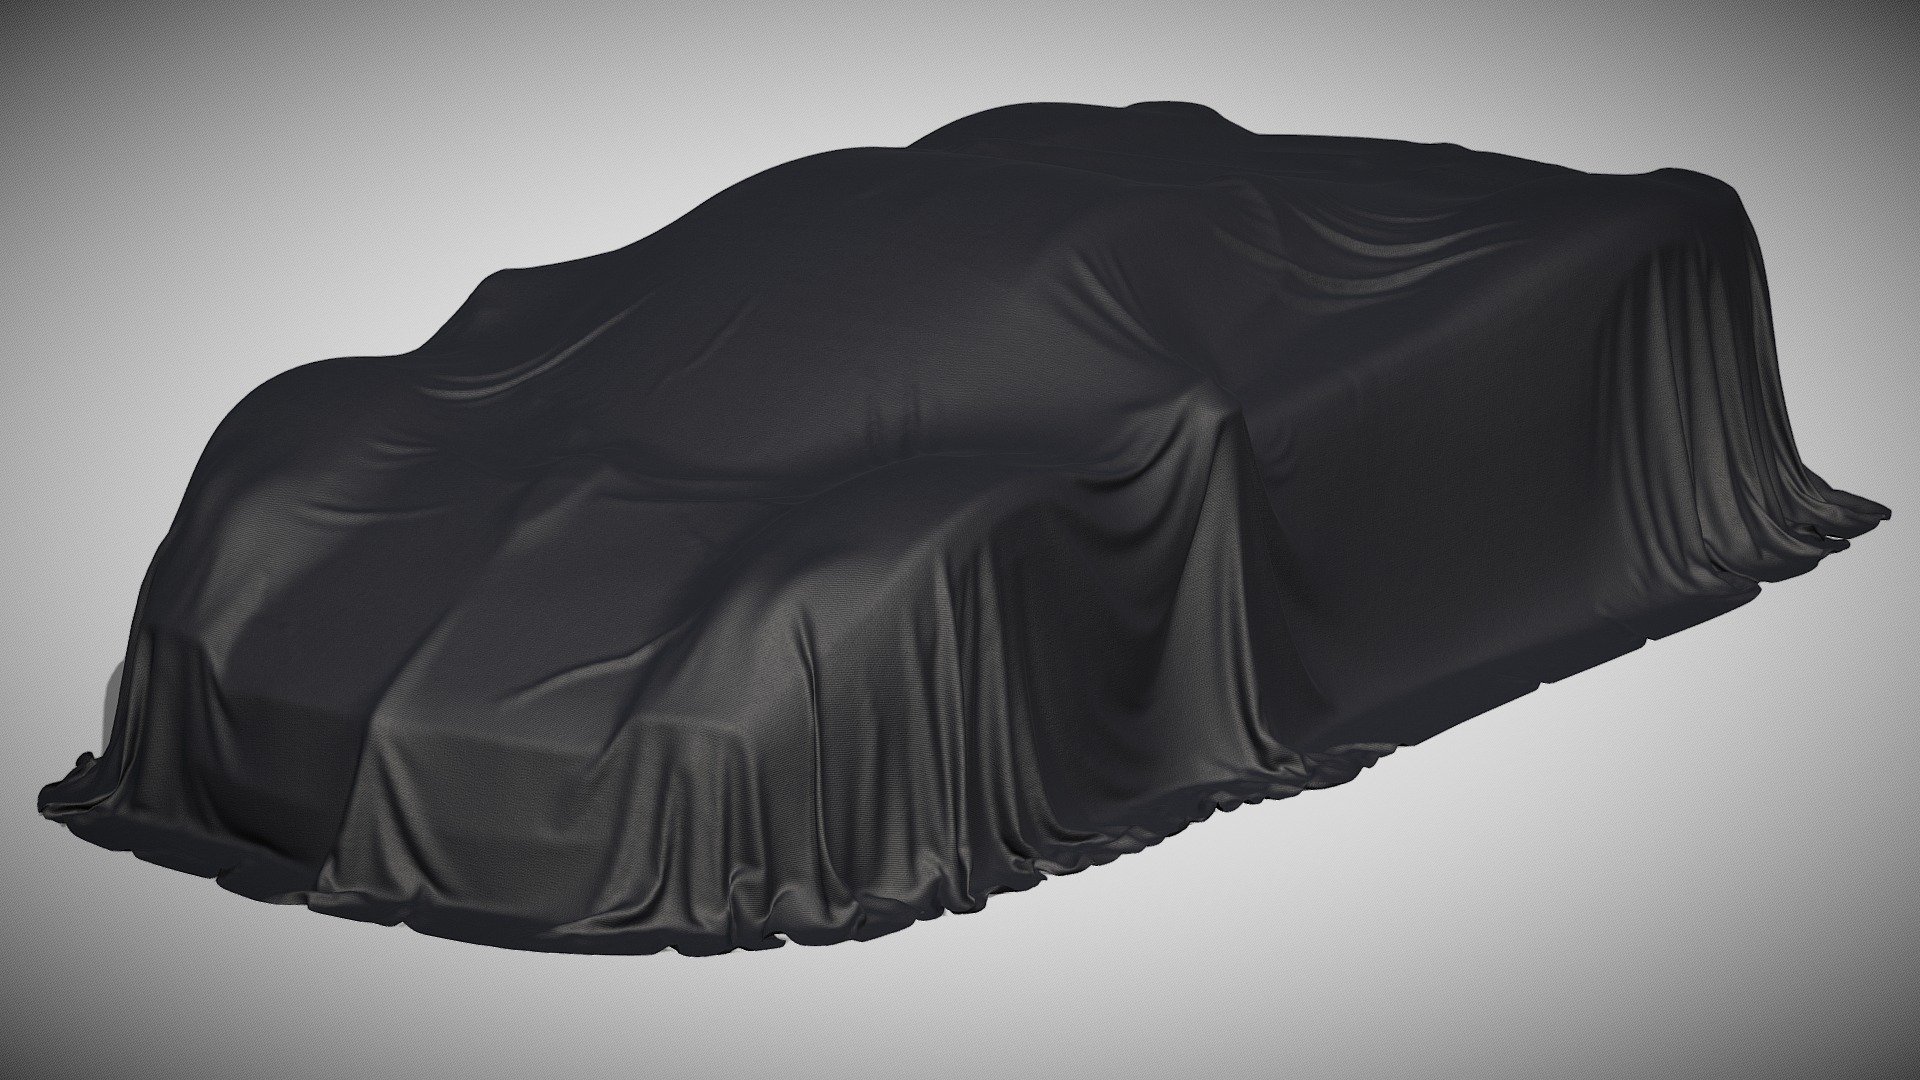 Car Cover hypercar

Cover car an auto show traditional hide and reveal ceremony textile cover props. Cover car a manufacturer or dealer motor show traditional fabric cover drapery. For auto show ceremonies, car show ceremonies, manufacturing of the vehicles, unusual future cars, transportation of the future, modern vehicles, modern vehicles engineering, concepts or comfortable vehicles, car machinery, new car presentations, contemporary vehicles, and future auto transportation engineering documentary or educational projects.

Clean geometry Light weight model, yet completely detailed for HI-Res renders. Use for movies, Advertisements or games

Corona render and materials

All textures include in *.rar files

Lighting setup is not included in the file! - Car Cover hypercar - Buy Royalty Free 3D model by zifir3d 3d model